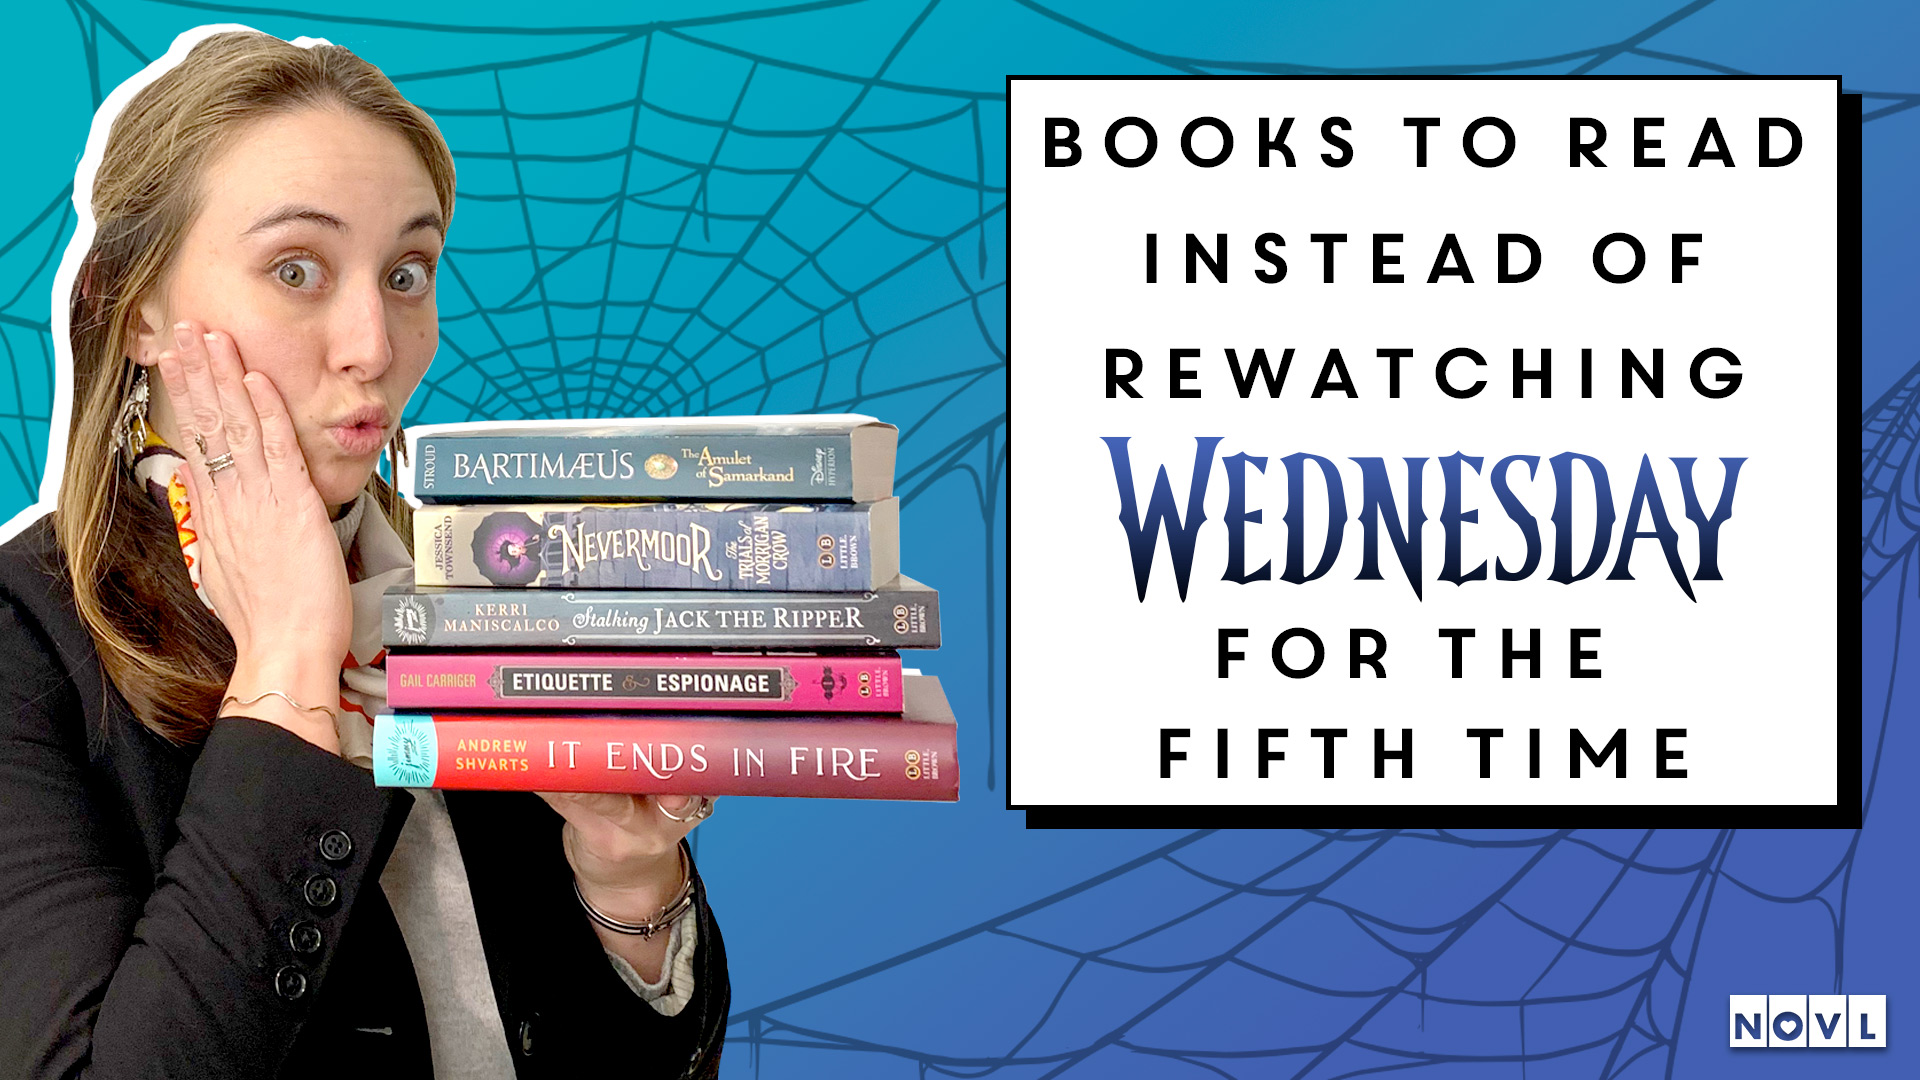 The NOVL Blog, Featured Image for Article: Books to Read Instead of Rewatching Wednesday for the Fifth Time